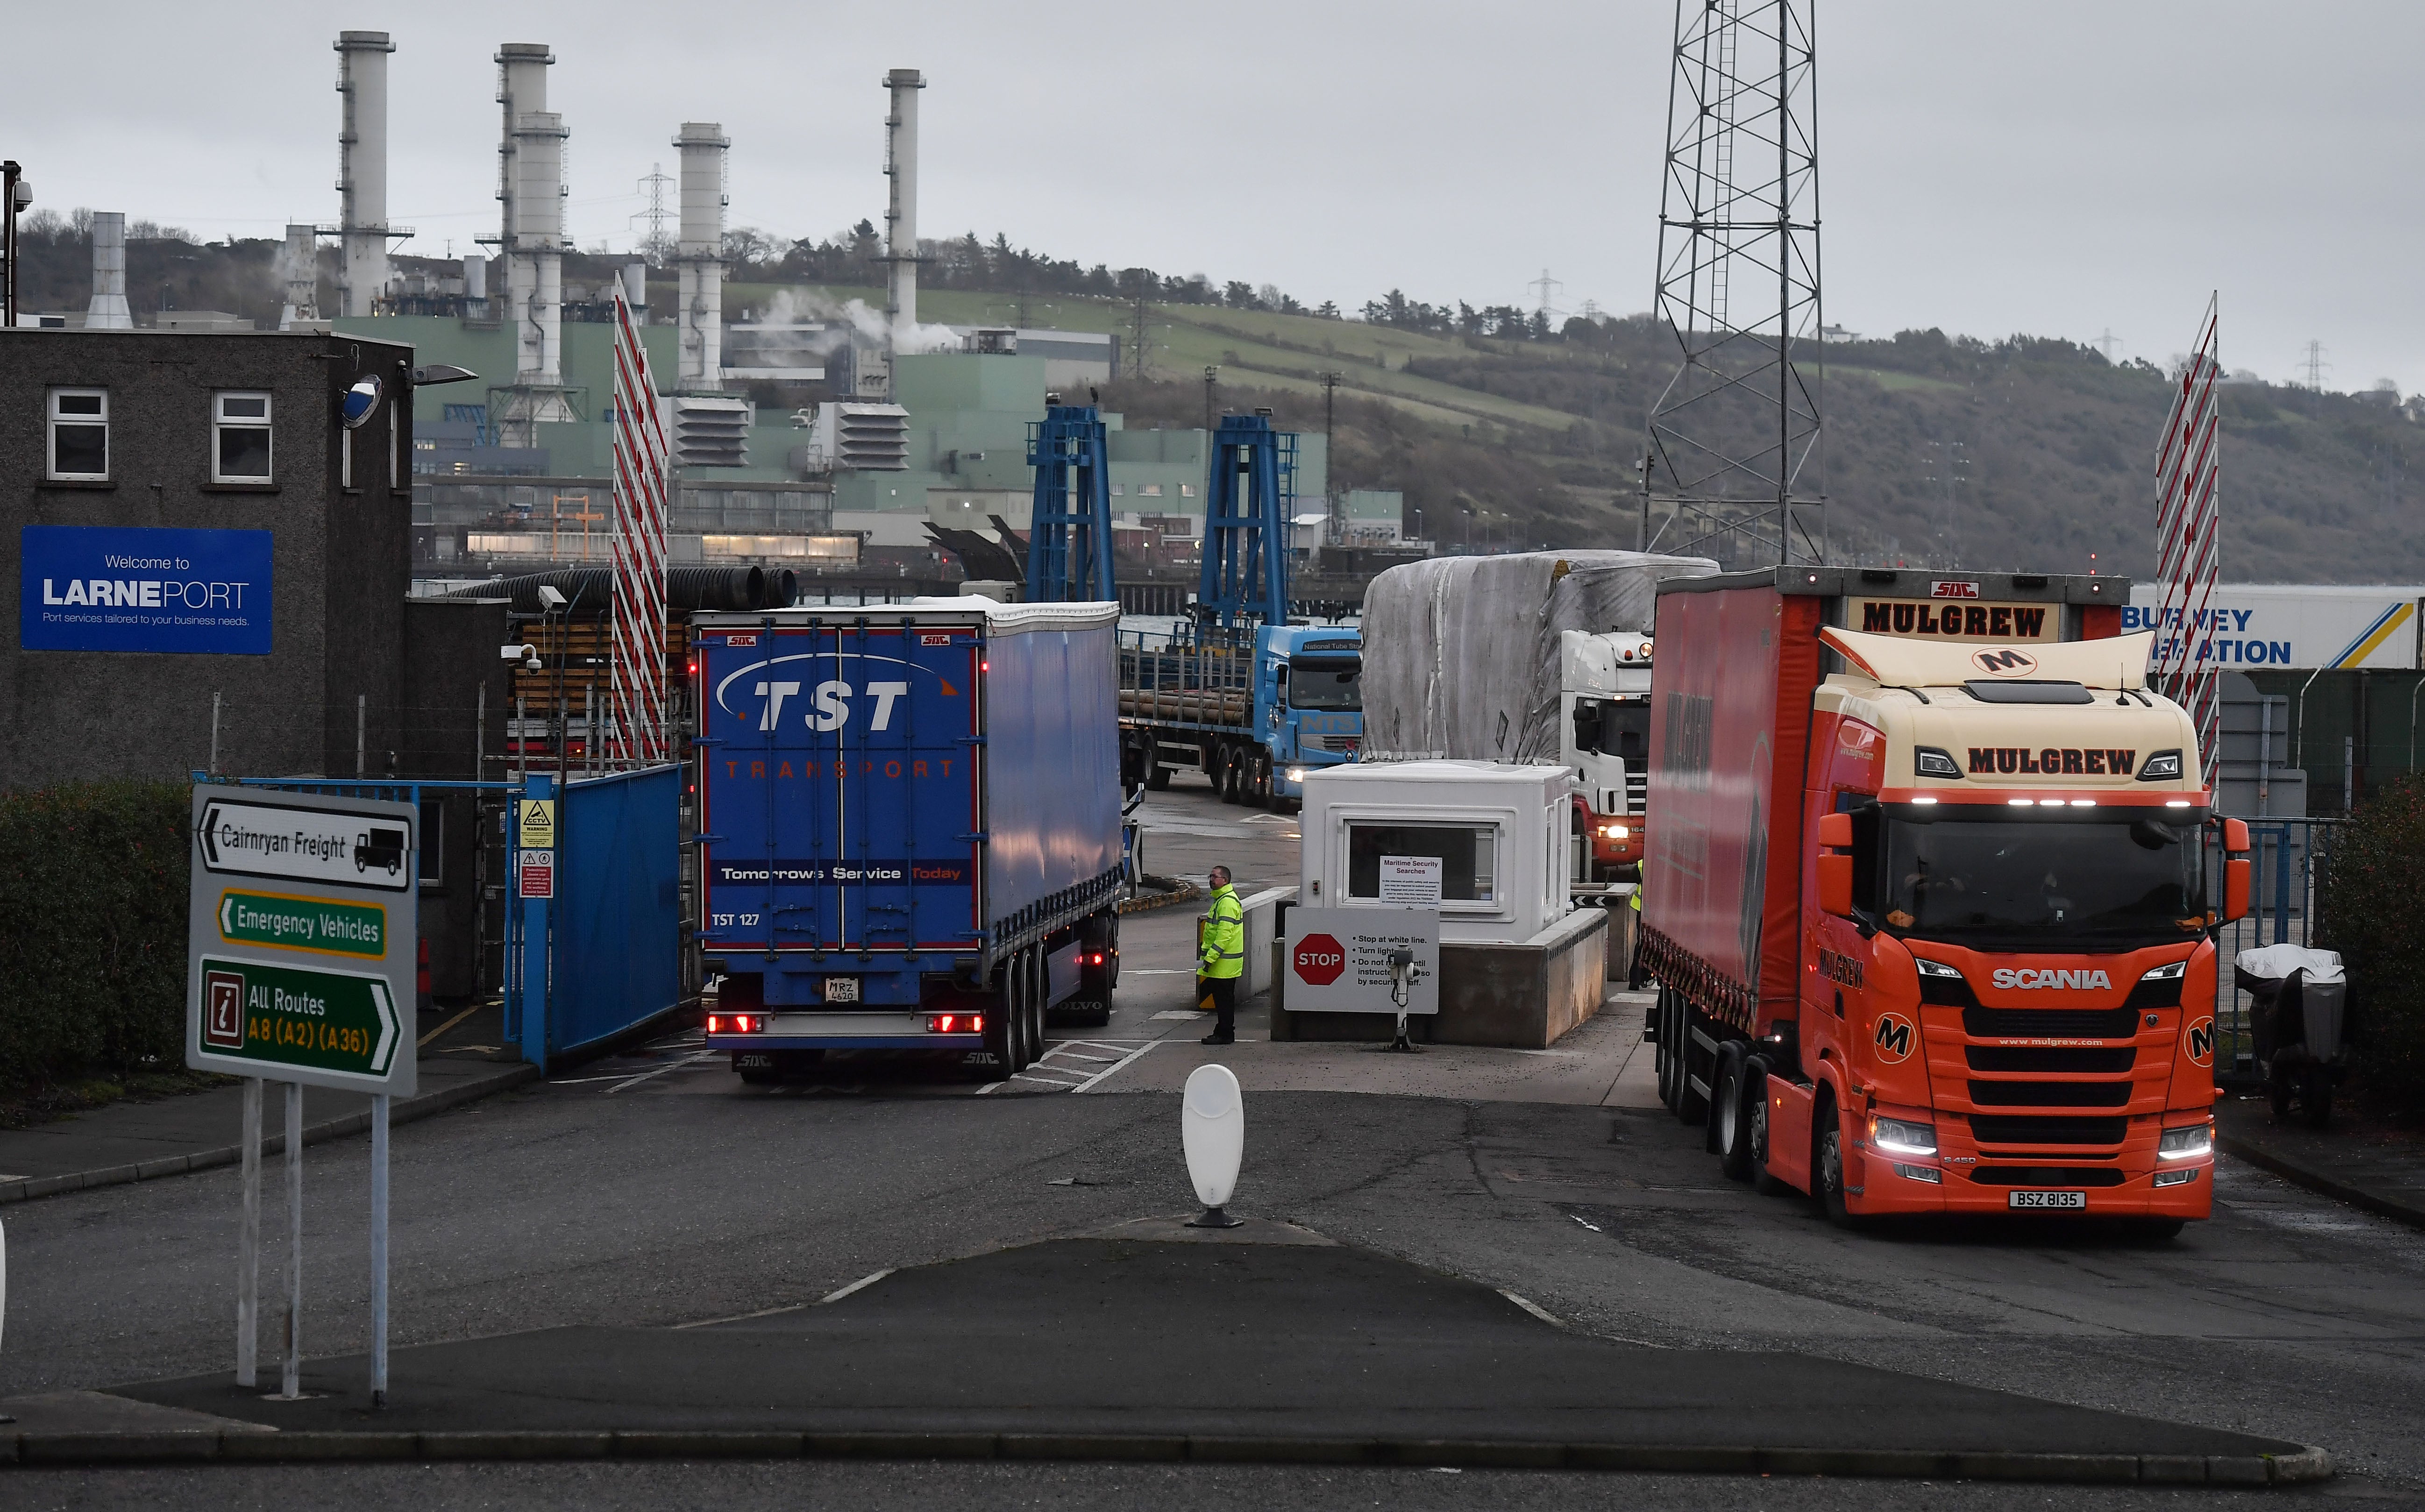 LARNE, NORTHERN IRELAND - NOVEMBER 14: Port officers inspect vehicles at a harbour checkpoint on November 14, 2018 in Larne, Northern Ireland. Prime Minister Theresa May is locked in talks with her cabinet as she attempts to push through an agreement between UK negotiators and their European Union counterparts relating to the United Kingdom's departure from the EU. The border between the Republic of Ireland and Northern Ireland has been a contentious issue during the Brexit talks. The harbour port of Larne has been suggested as a possible border entry checkpoint for agriculture livestock and goods to avoid a so called 'hard border'. (Photo by Charles McQuillan/Getty Images)